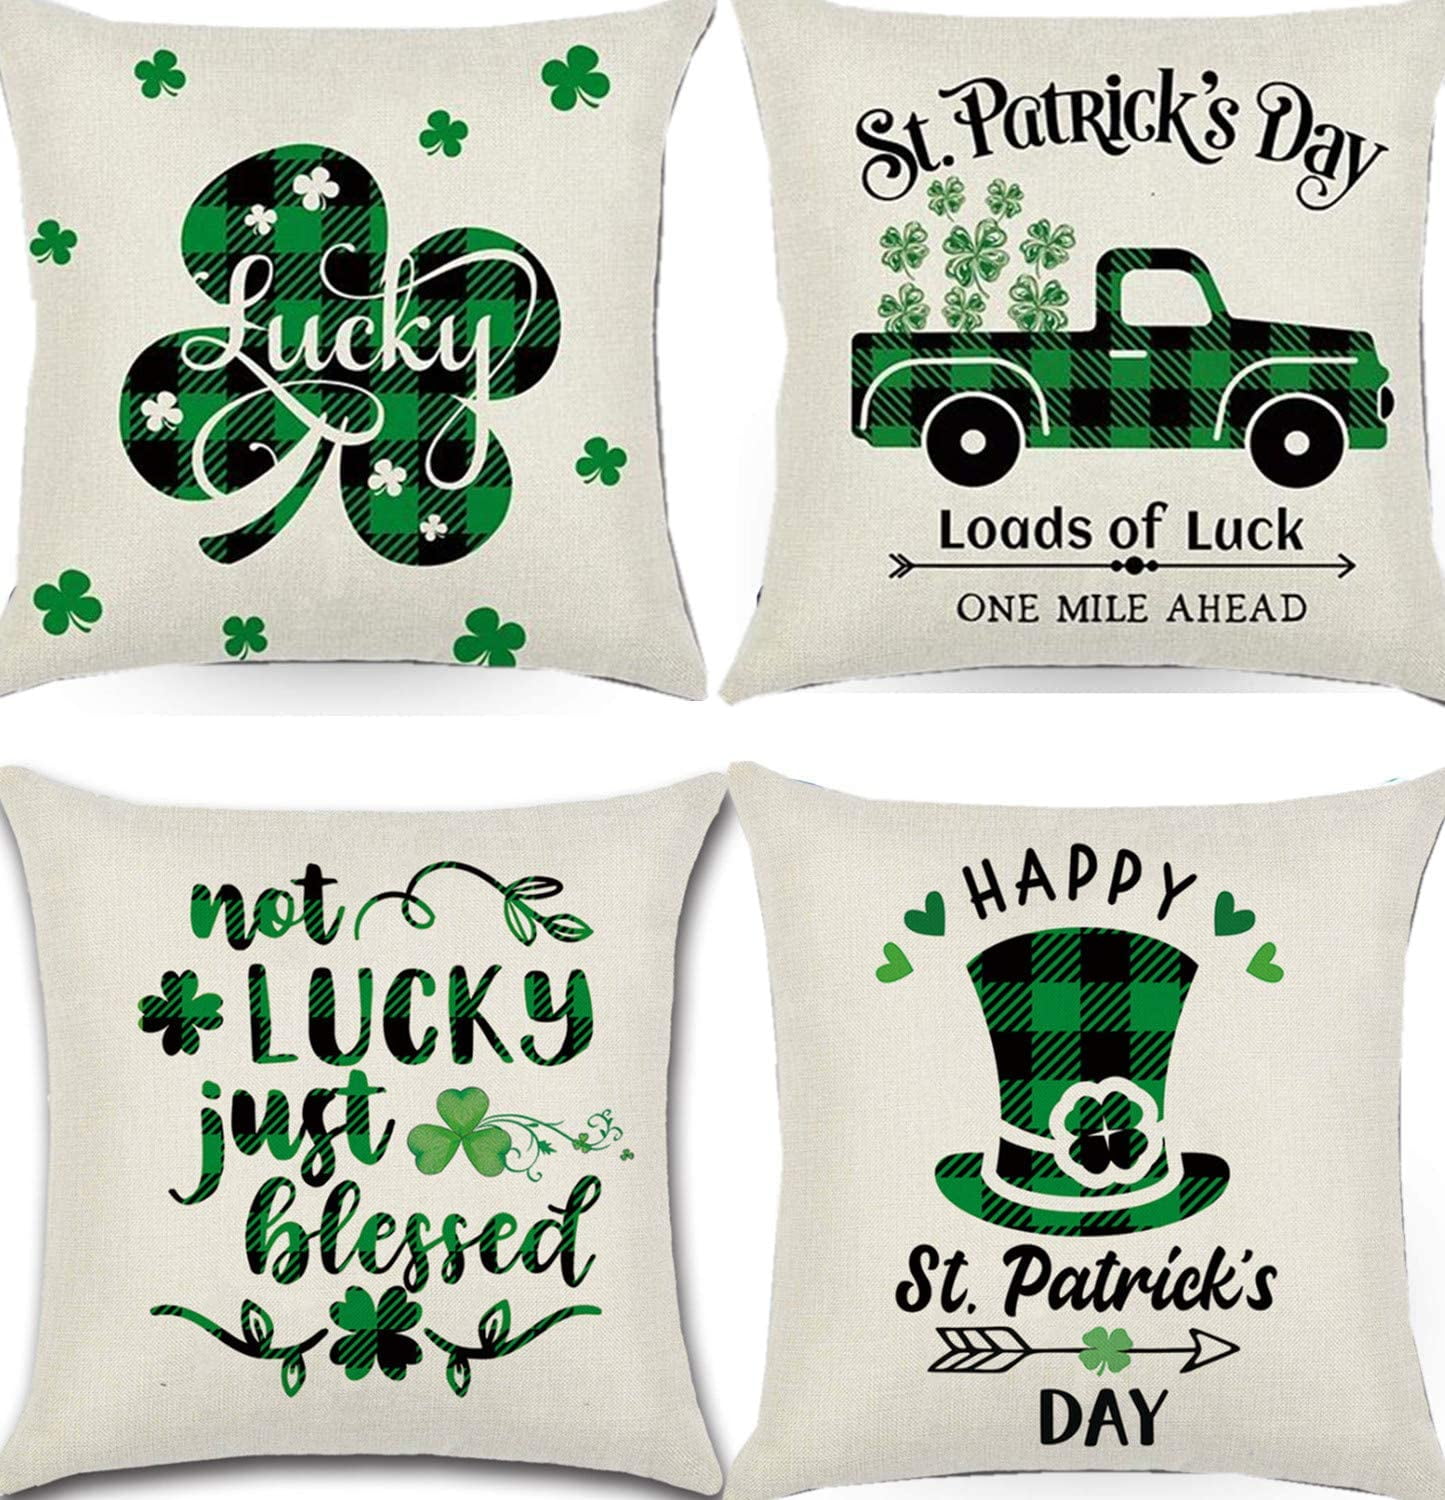 St Patrick's Day Pillow Covers 18 x18 Inch Buffalo Check Throw Pillow Cover 